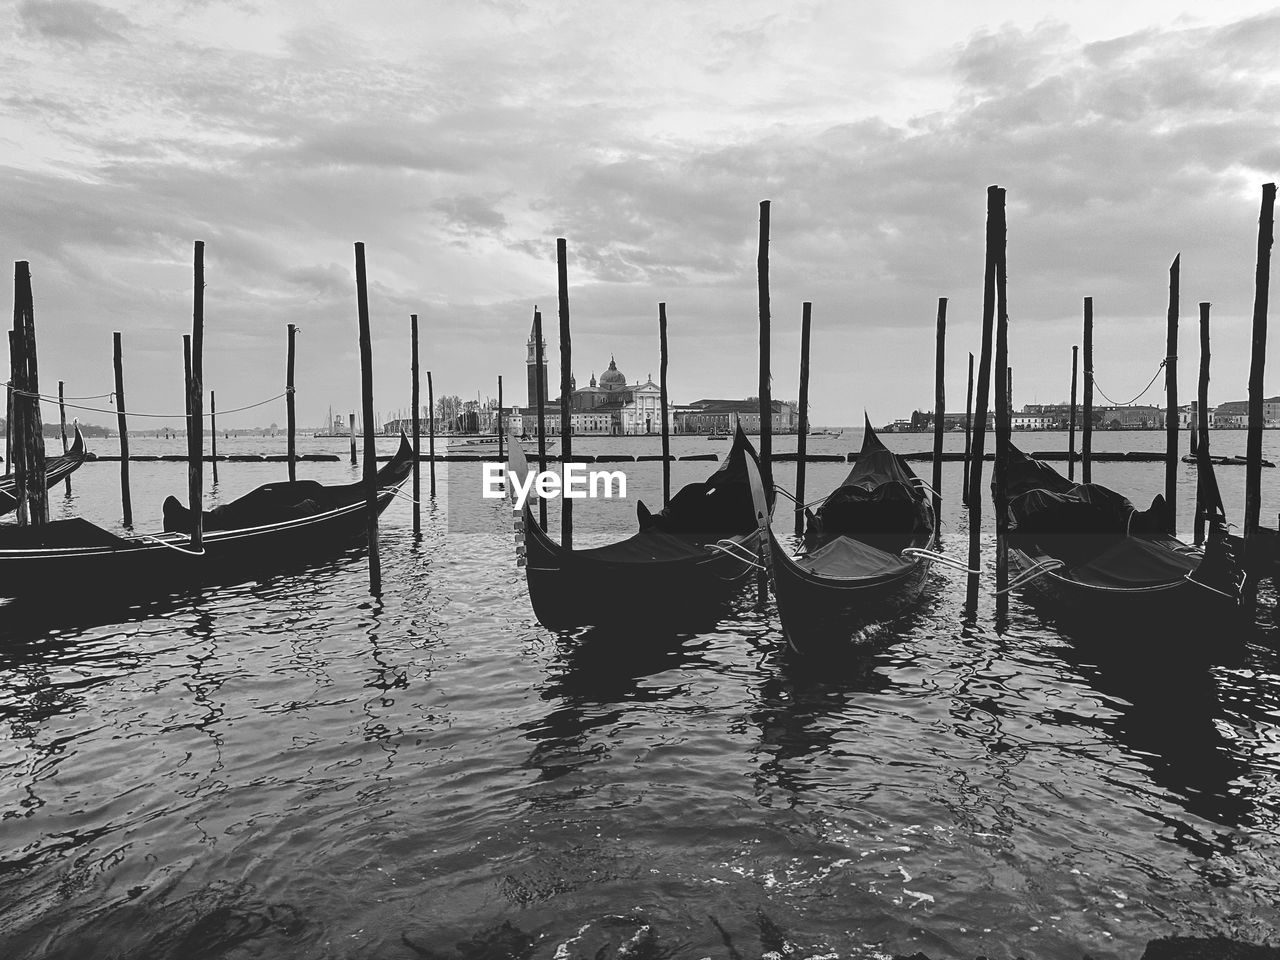 nautical vessel, water, gondola, transportation, mode of transportation, black and white, boat, sea, nature, sky, travel destinations, vehicle, travel, monochrome, monochrome photography, cloud, wooden post, moored, architecture, canal, lagoon, wood, post, tourism, no people, outdoors, watercraft, scenics - nature, boating, pier, beauty in nature, pole, in a row, tranquility, idyllic